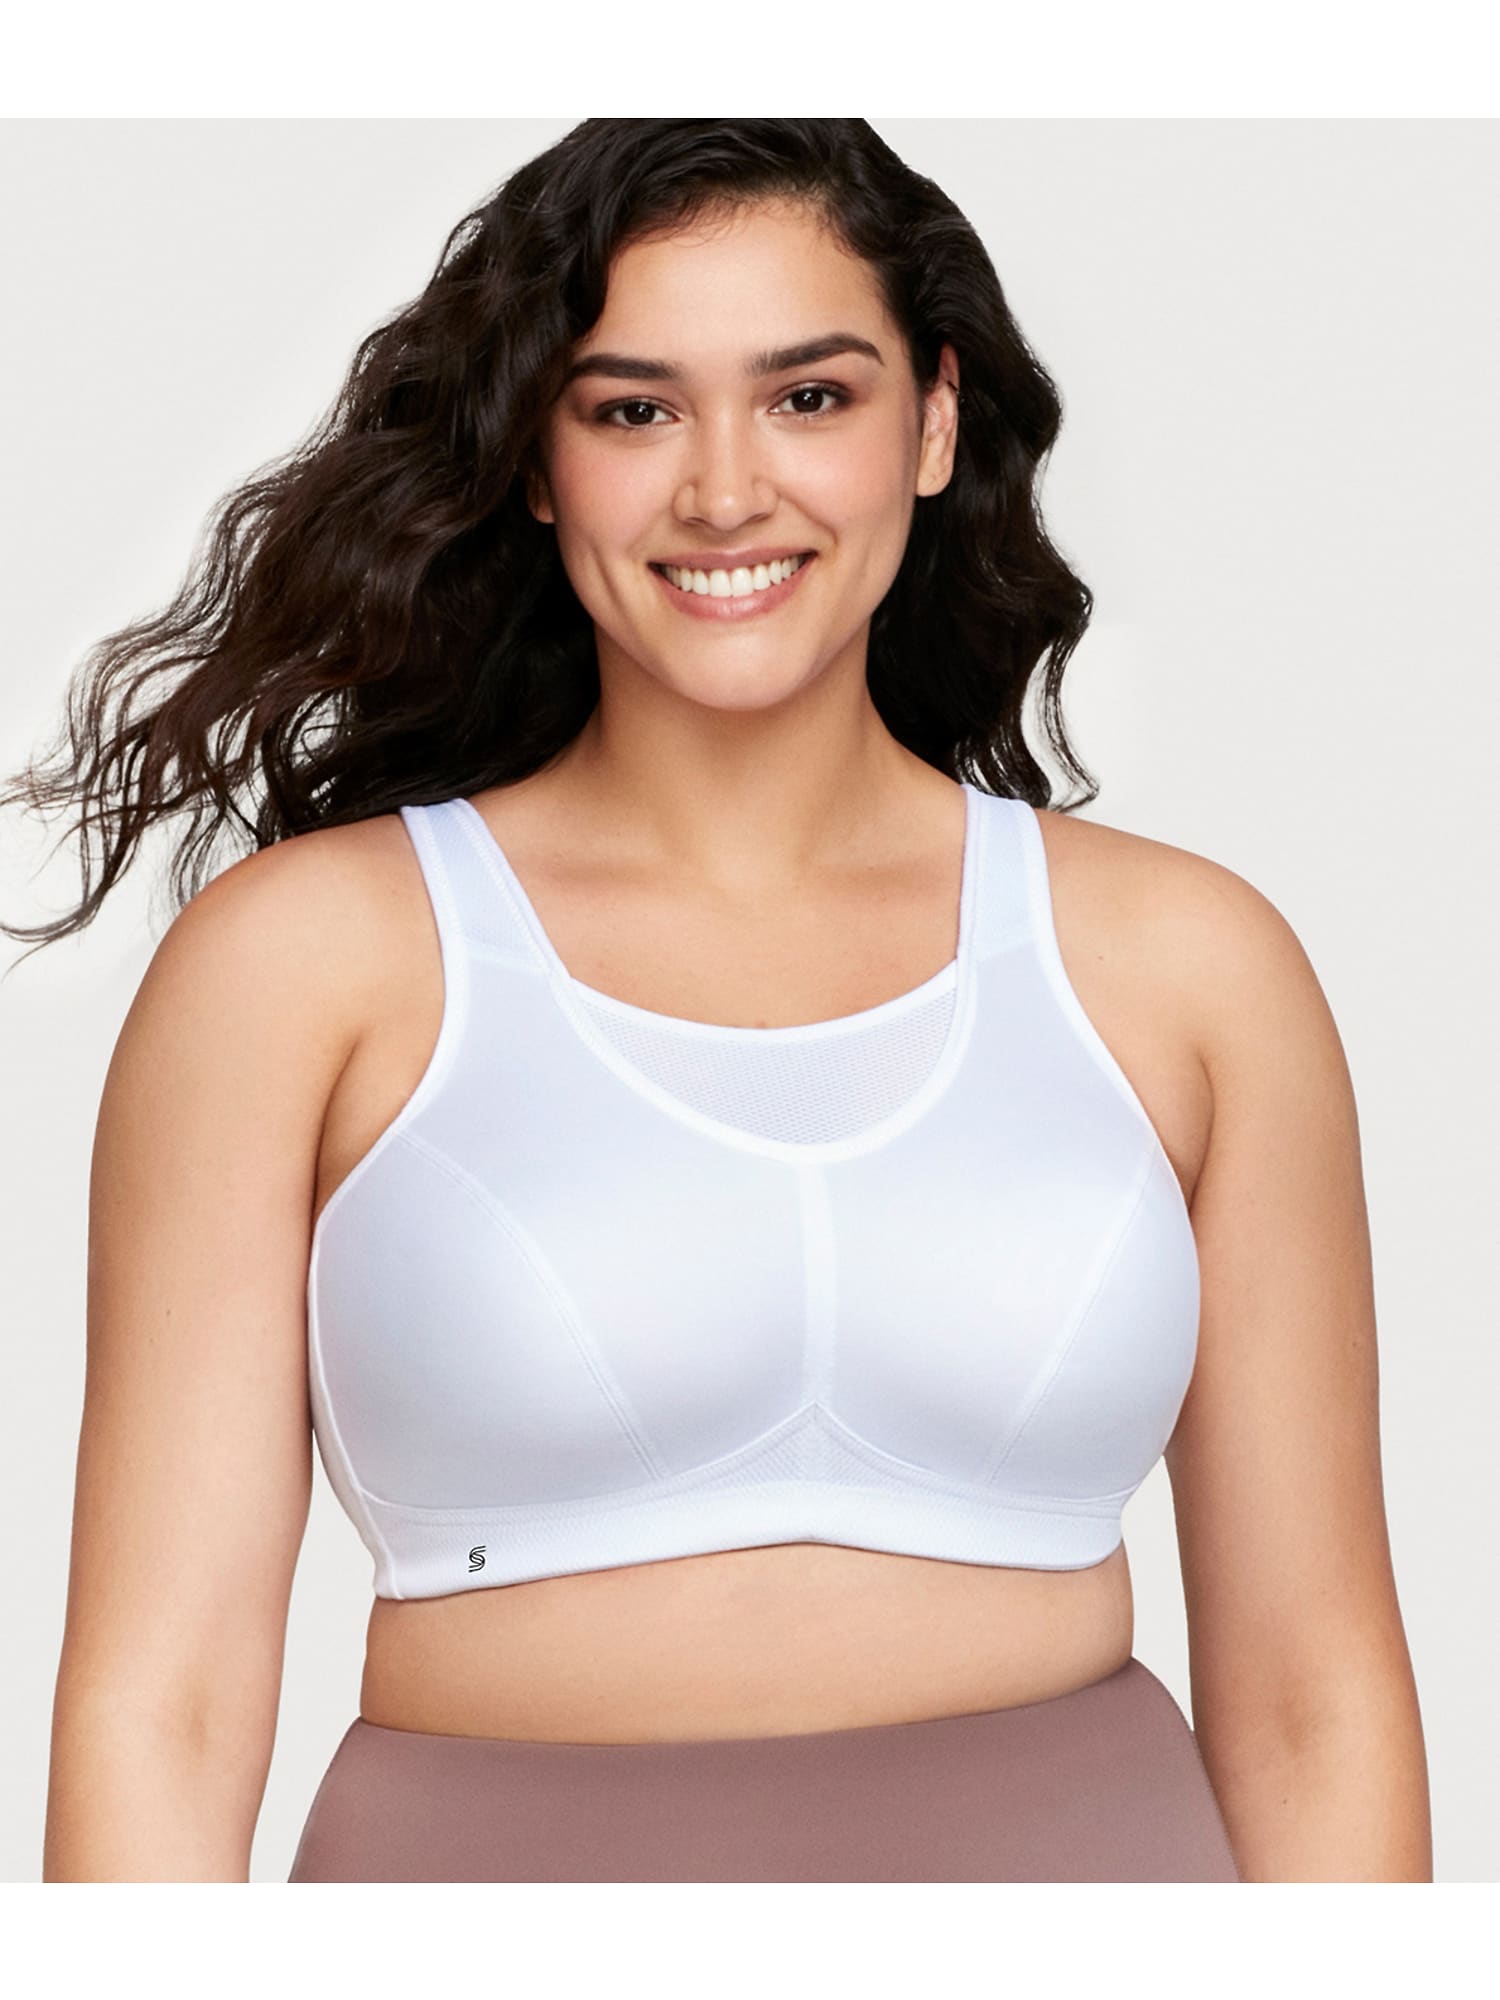 Glamorise Women's Full Figure No-bounce Cami Wirefree Sports Bra 1066 White  44dd for sale online